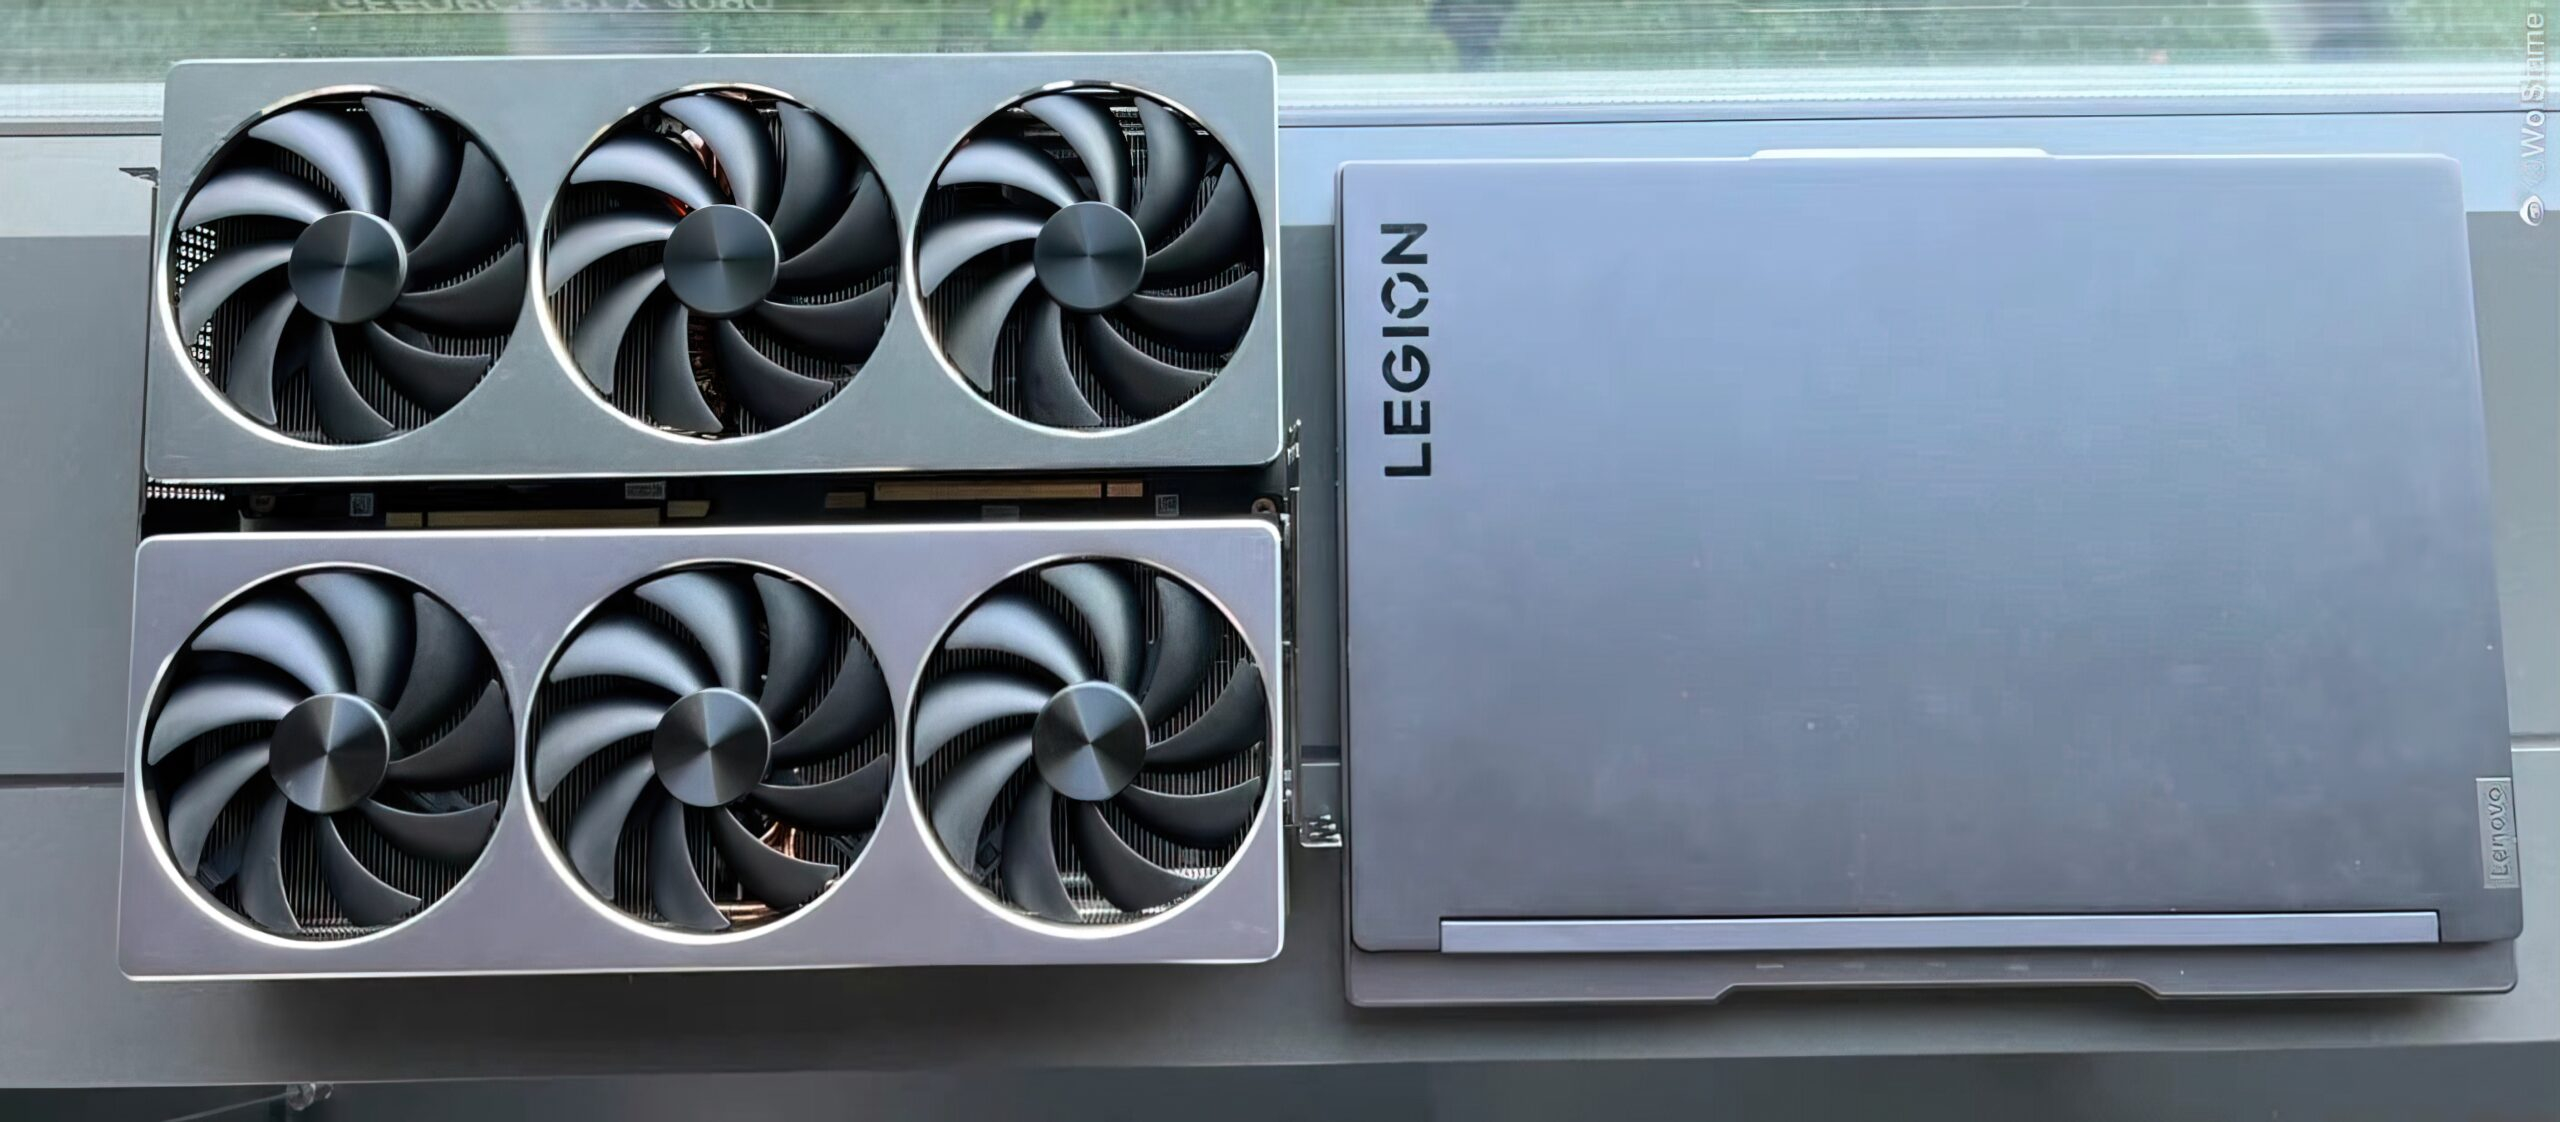 the left pictured are two graphic cards, the right shows a legion laptop